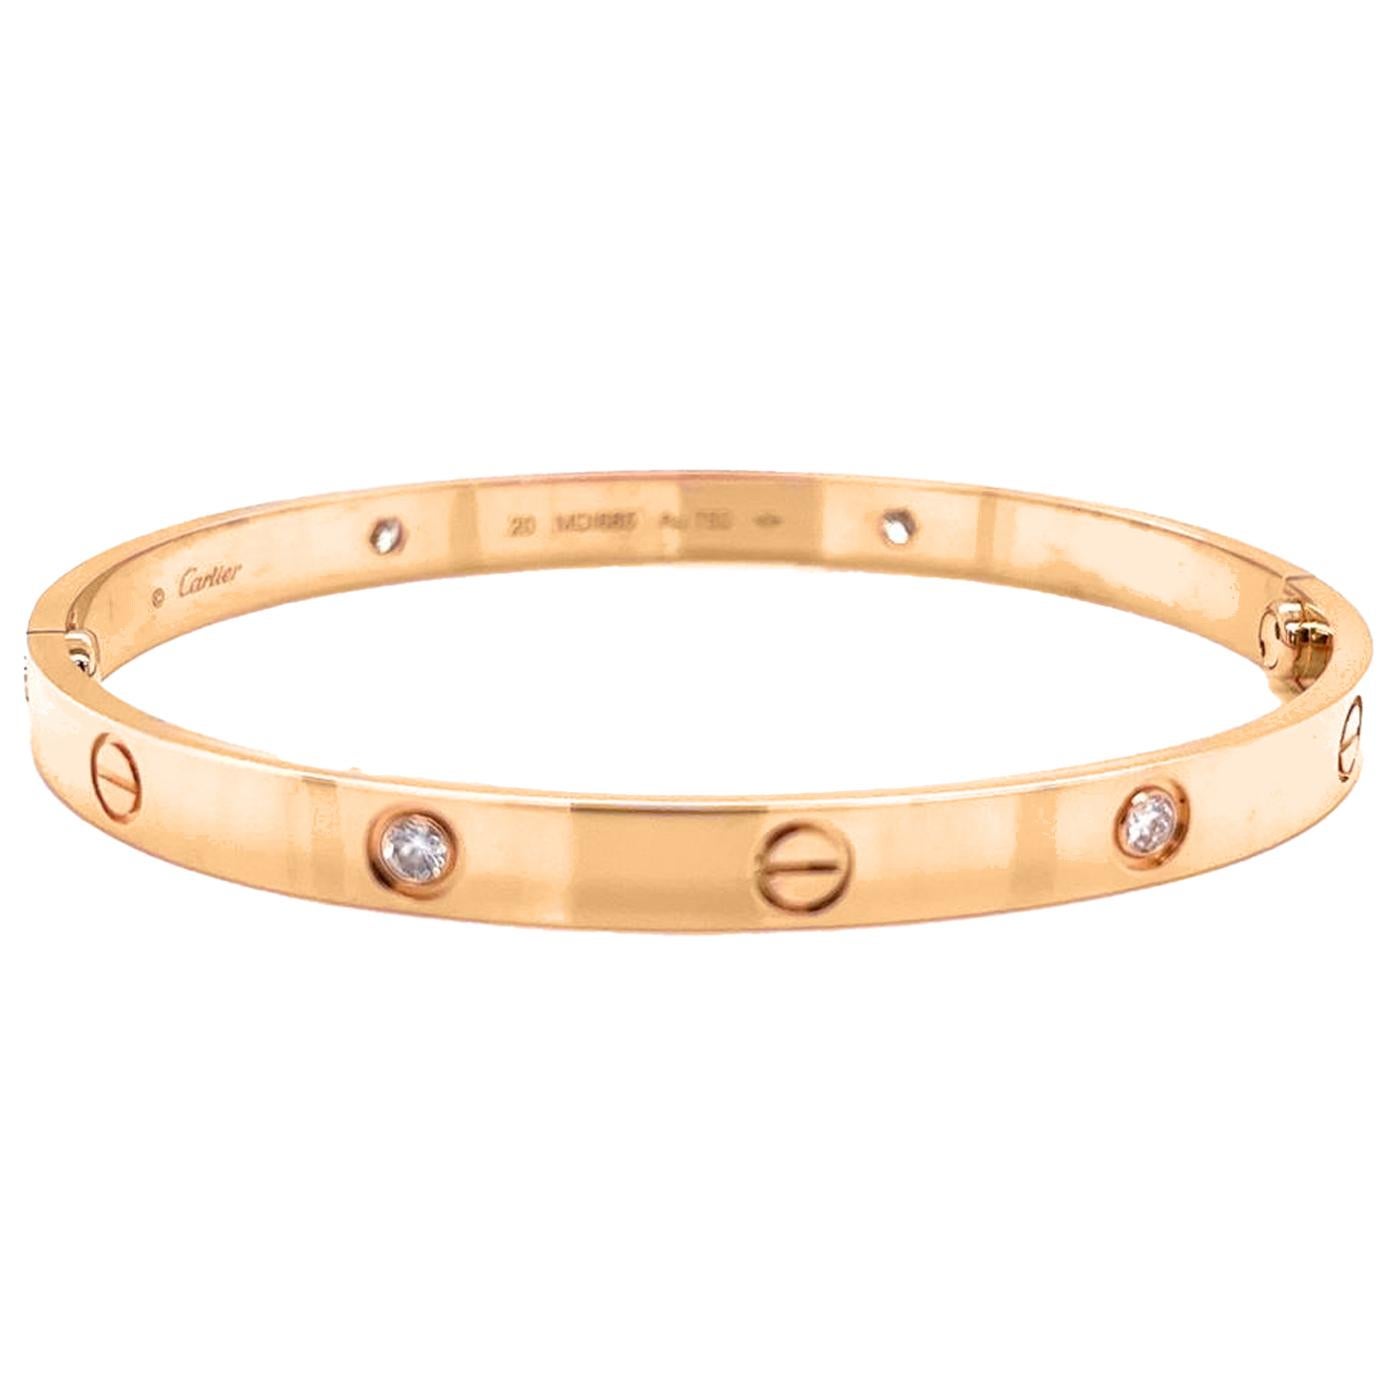 LOVE bracelet, 18K yellow gold with 4 brilliant-cut diamonds totaling 0.42 carats. Comes with a screwdriver. Width: 6.1 mm. Created in New York in 1969, the LOVE bracelet is an icon of jewelry design: a close-fitting, oval bracelet composed of two